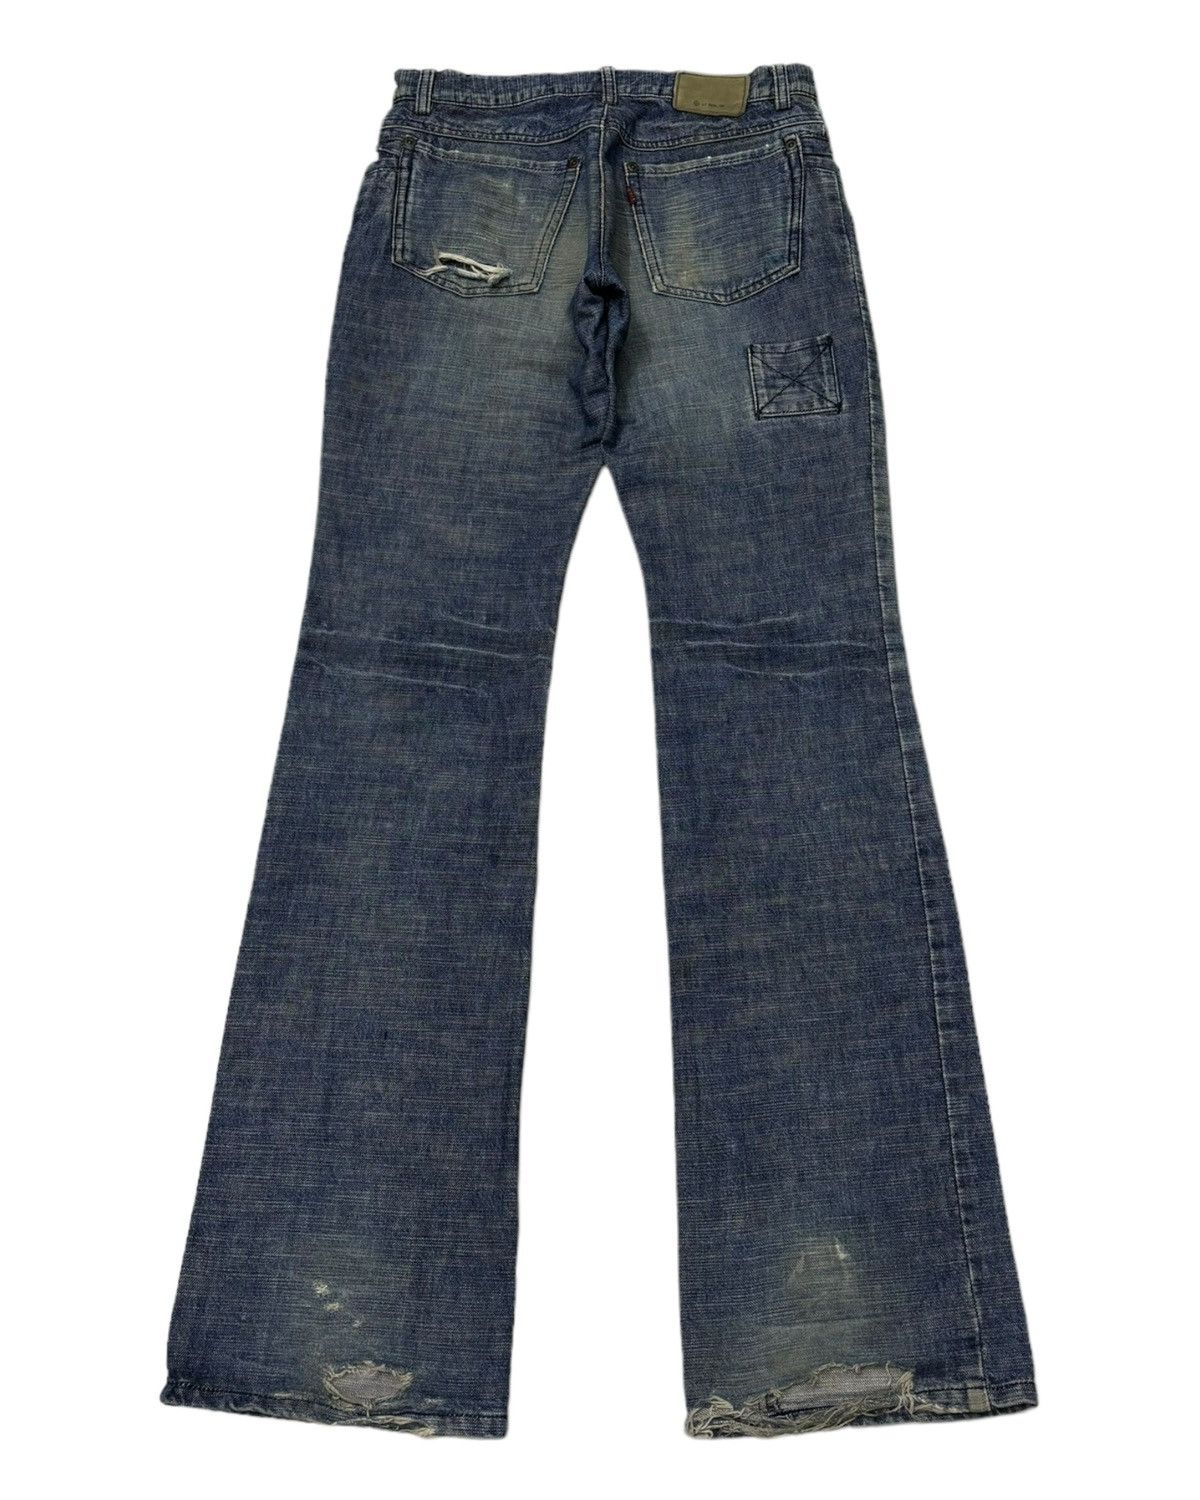 Archival Clothing - 🔥ARCHIVE L7 REAL HIP JAPANESE FLARED DENIM BOOTCUT JEANS - 1